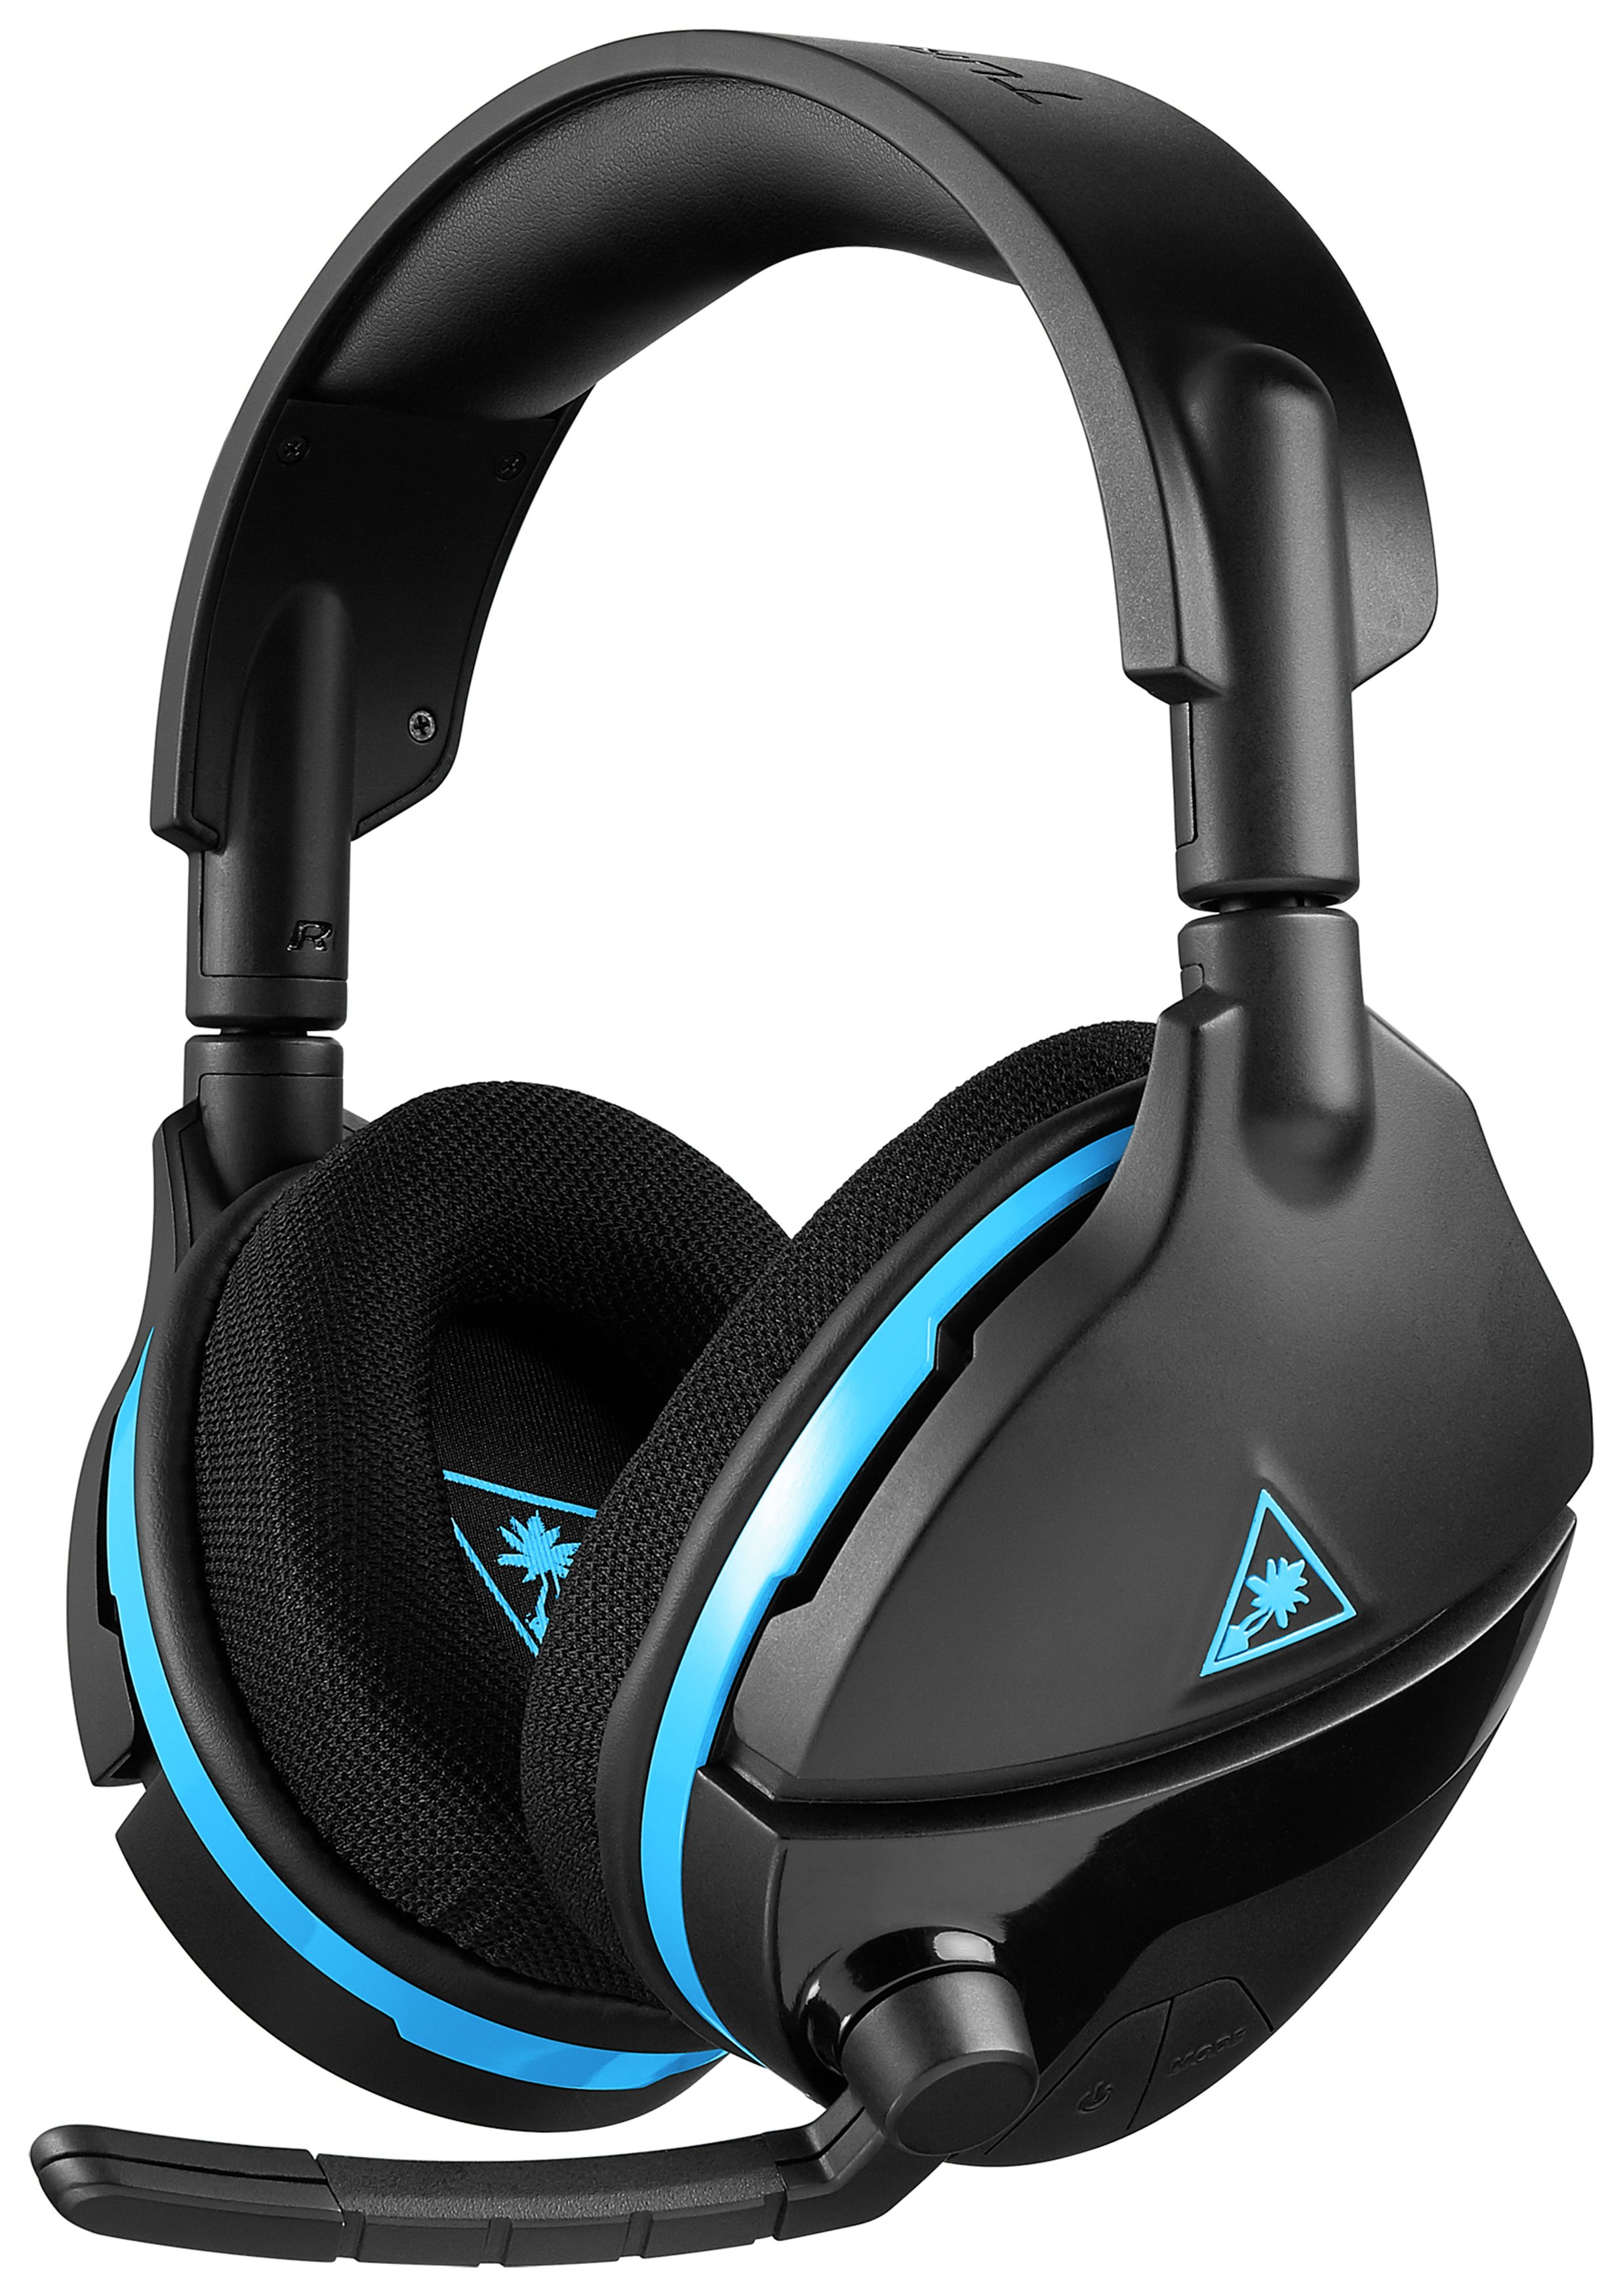 Turtle Beach Stealth 600 Wireless PS4 Headset Review